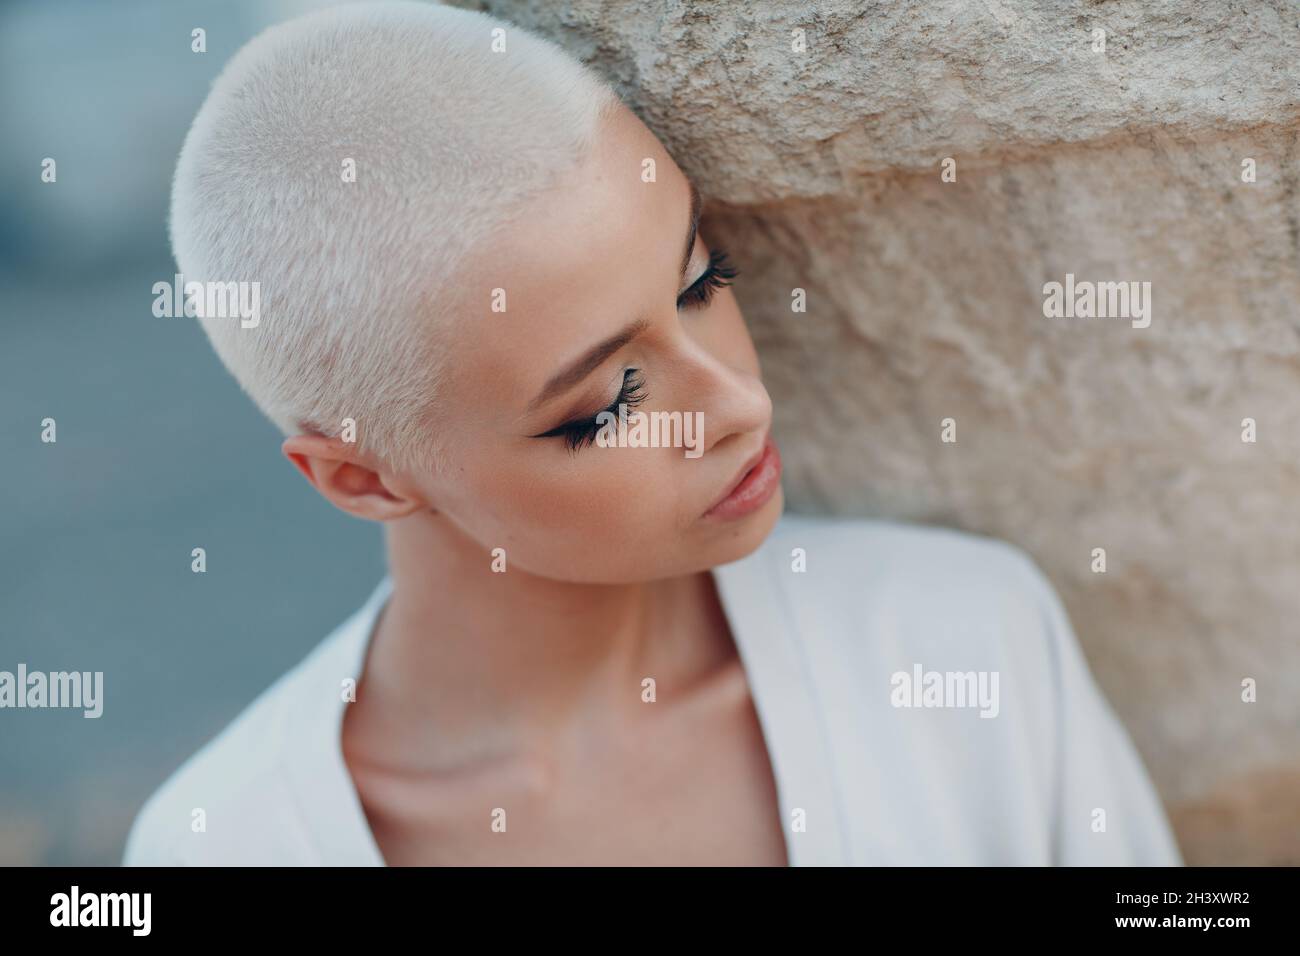 Millenial young woman blonde short hair outdoor portrait. Stock Photo